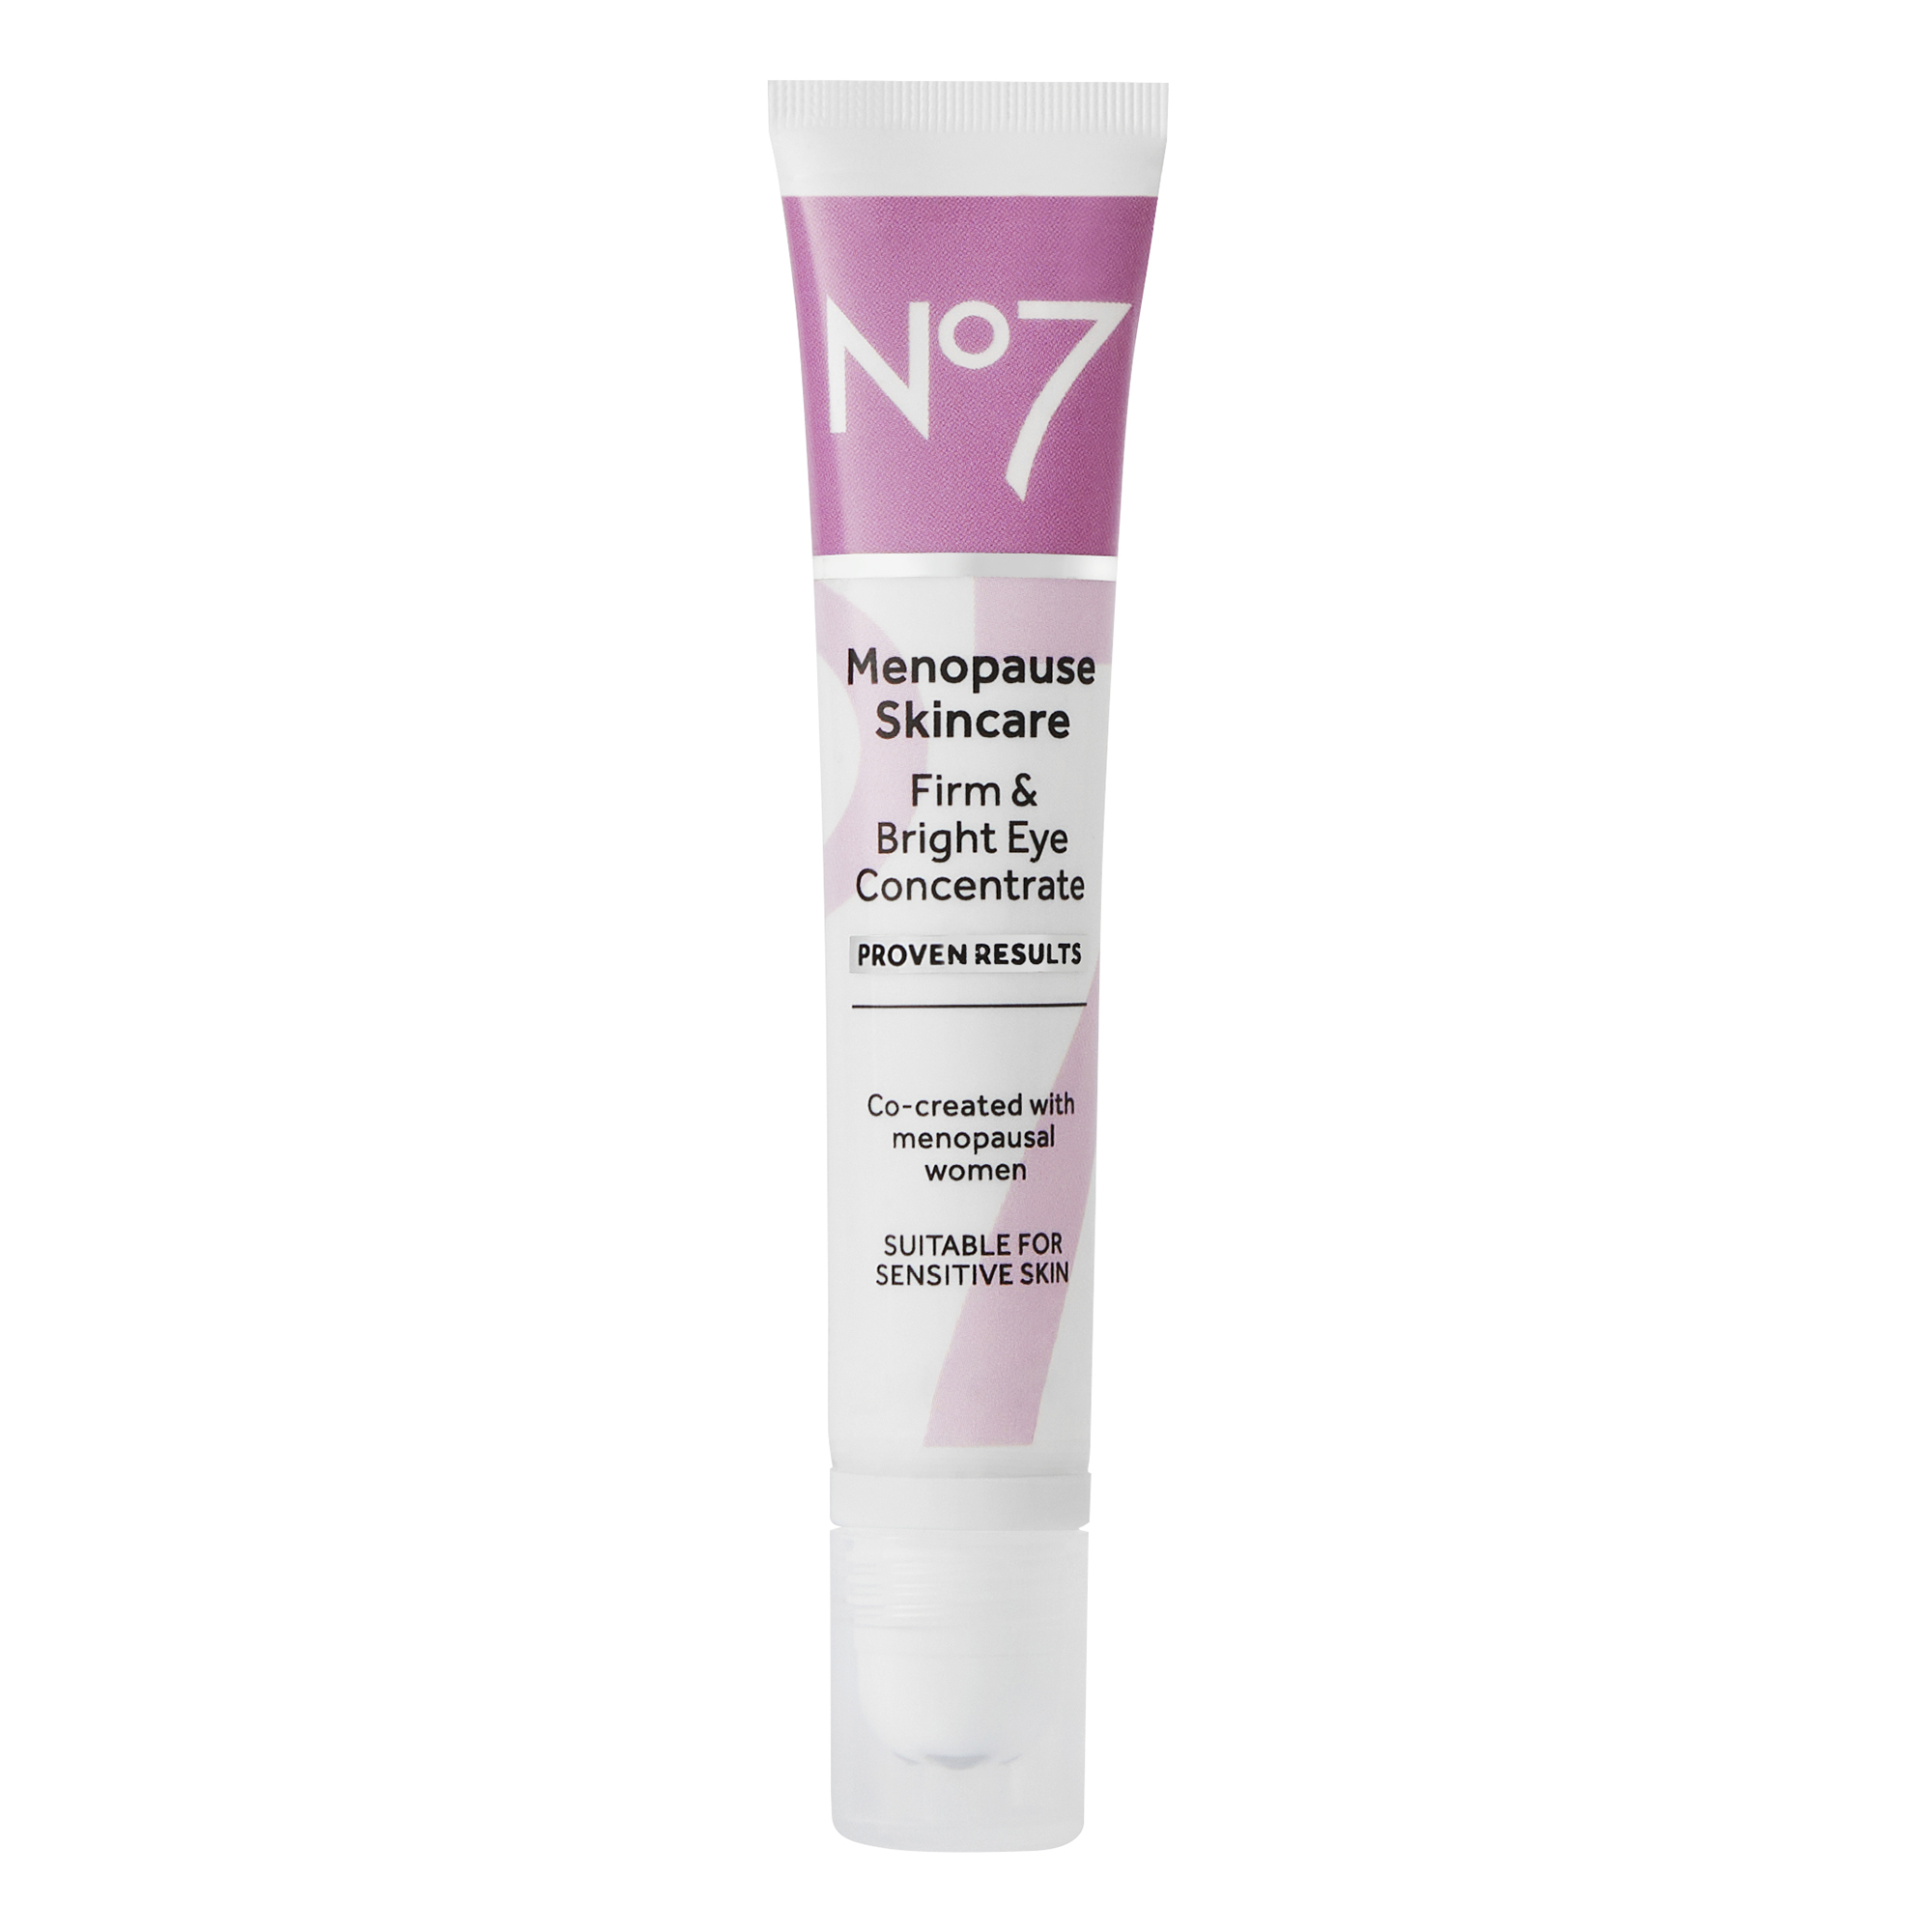 No7 Menopause Skincare Firm & Bright Eye Concentrate Serum for Dark Circles and Wrinkles, 0.5 oz - image 1 of 10